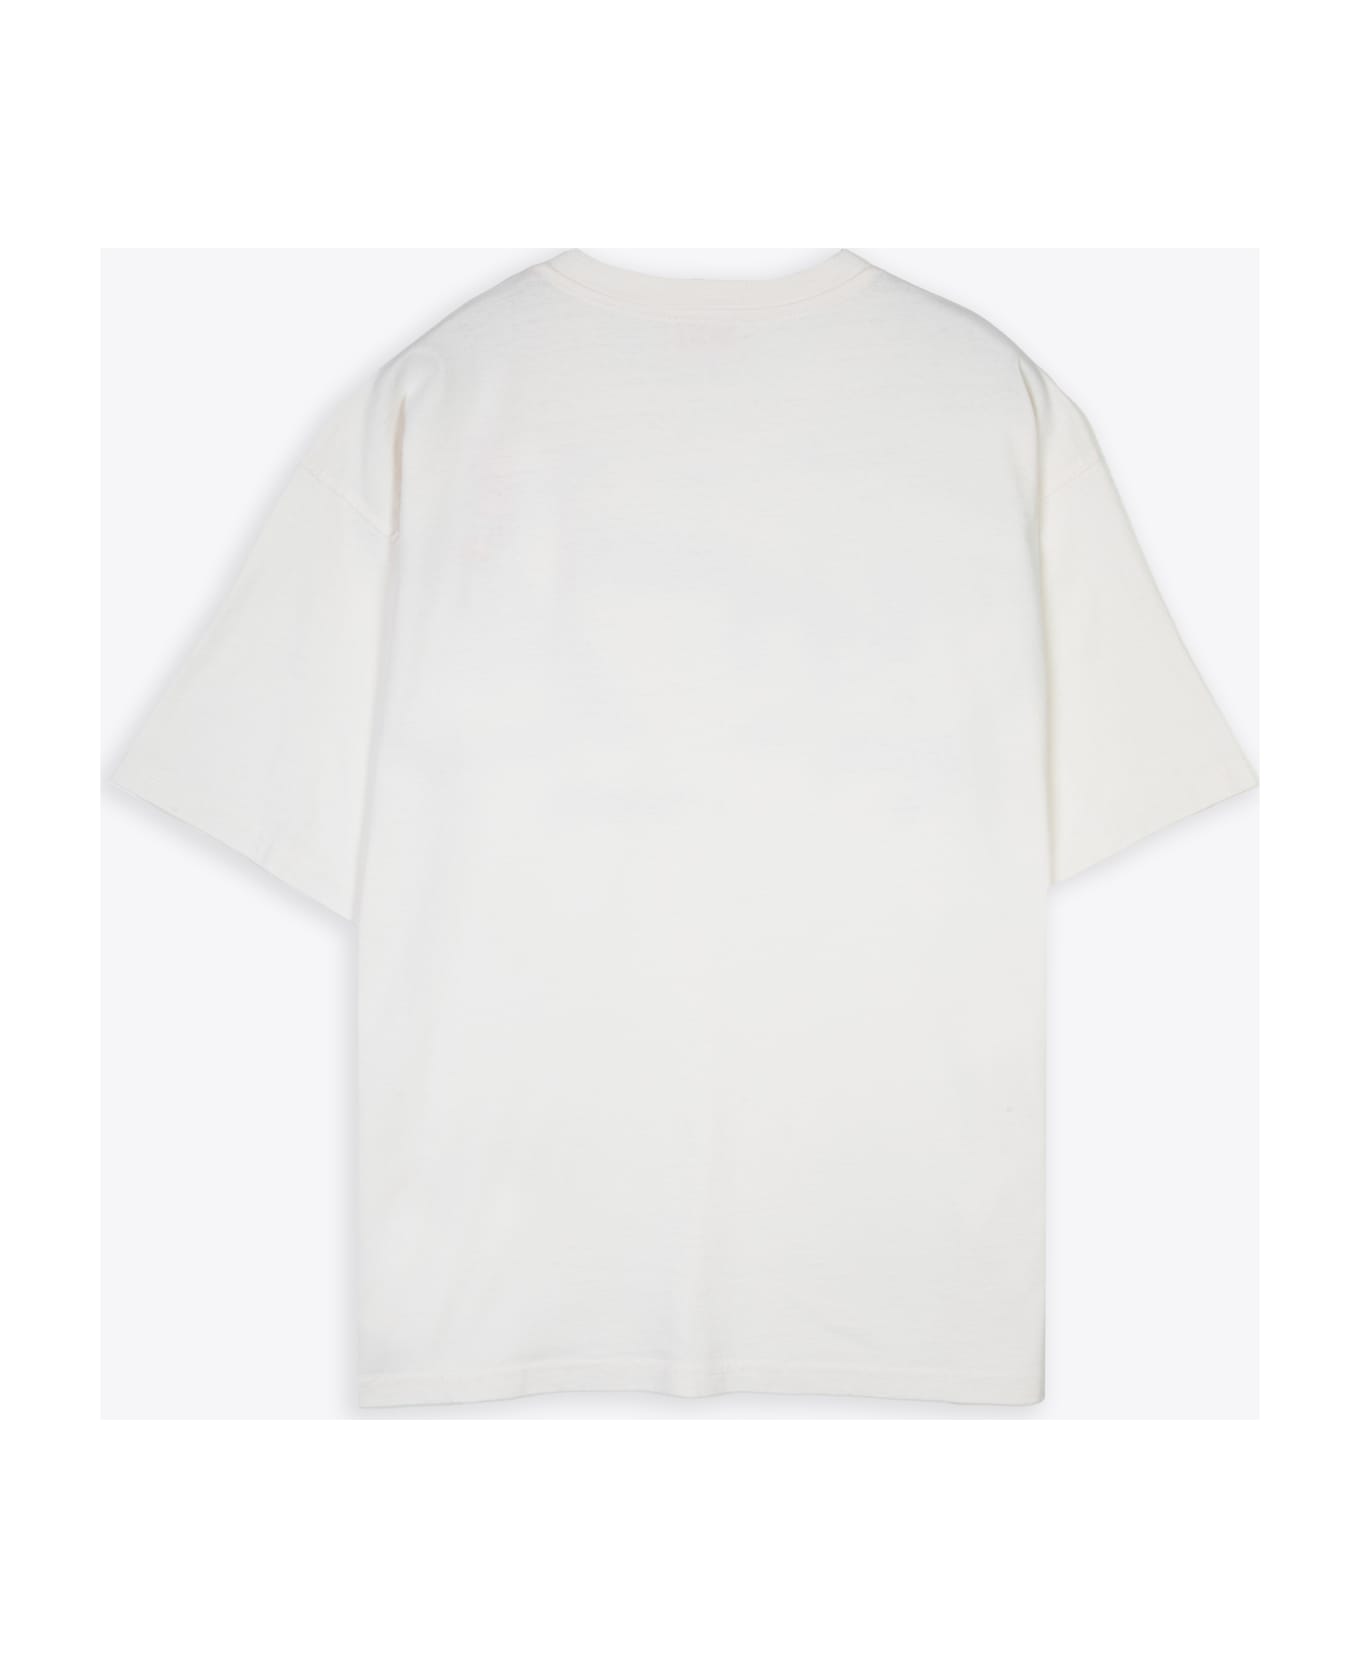 Diesel T-boxt-n14 Off white cotton t-shirt with flock logo print - T Boxt N14 - Panna/nero シャツ